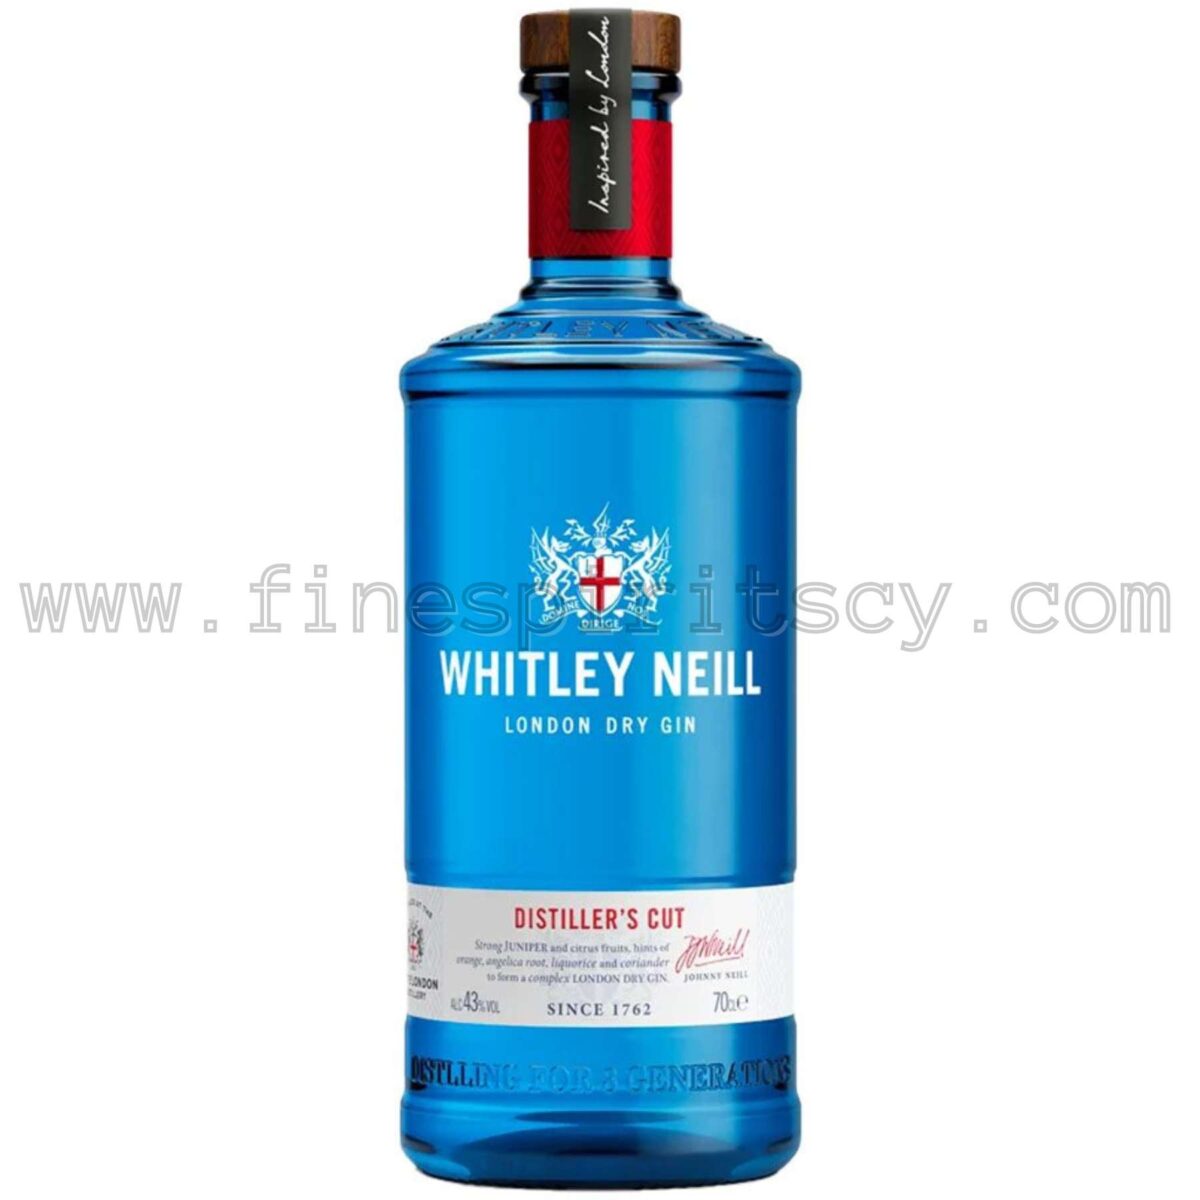 Whitley Neill Distillers Cut Cyprus Price Gin 700ml 70cl 0.7L London Dry Fine Spirits